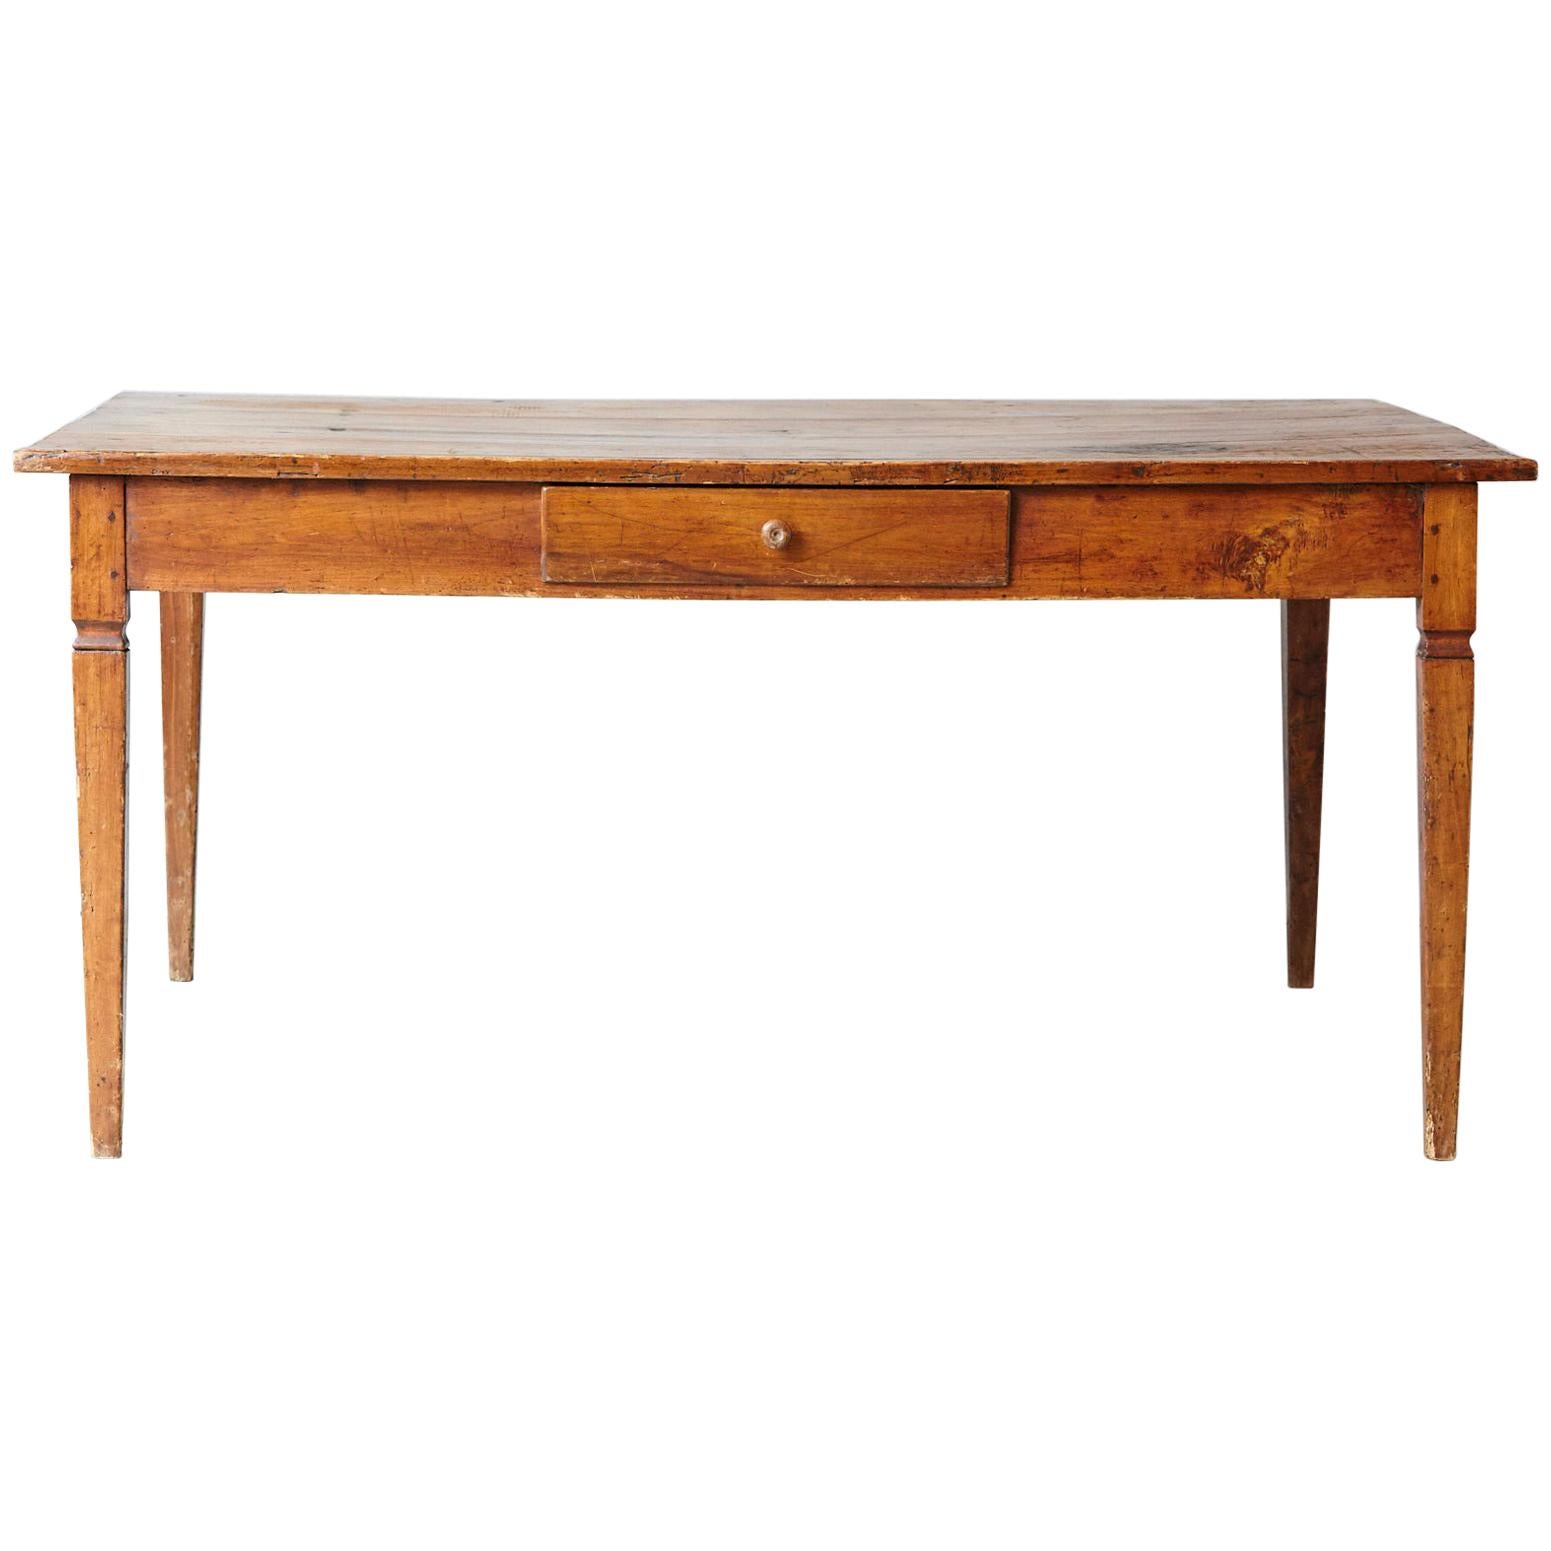 19th Century Italian Country Pine Farm Table with Drawer